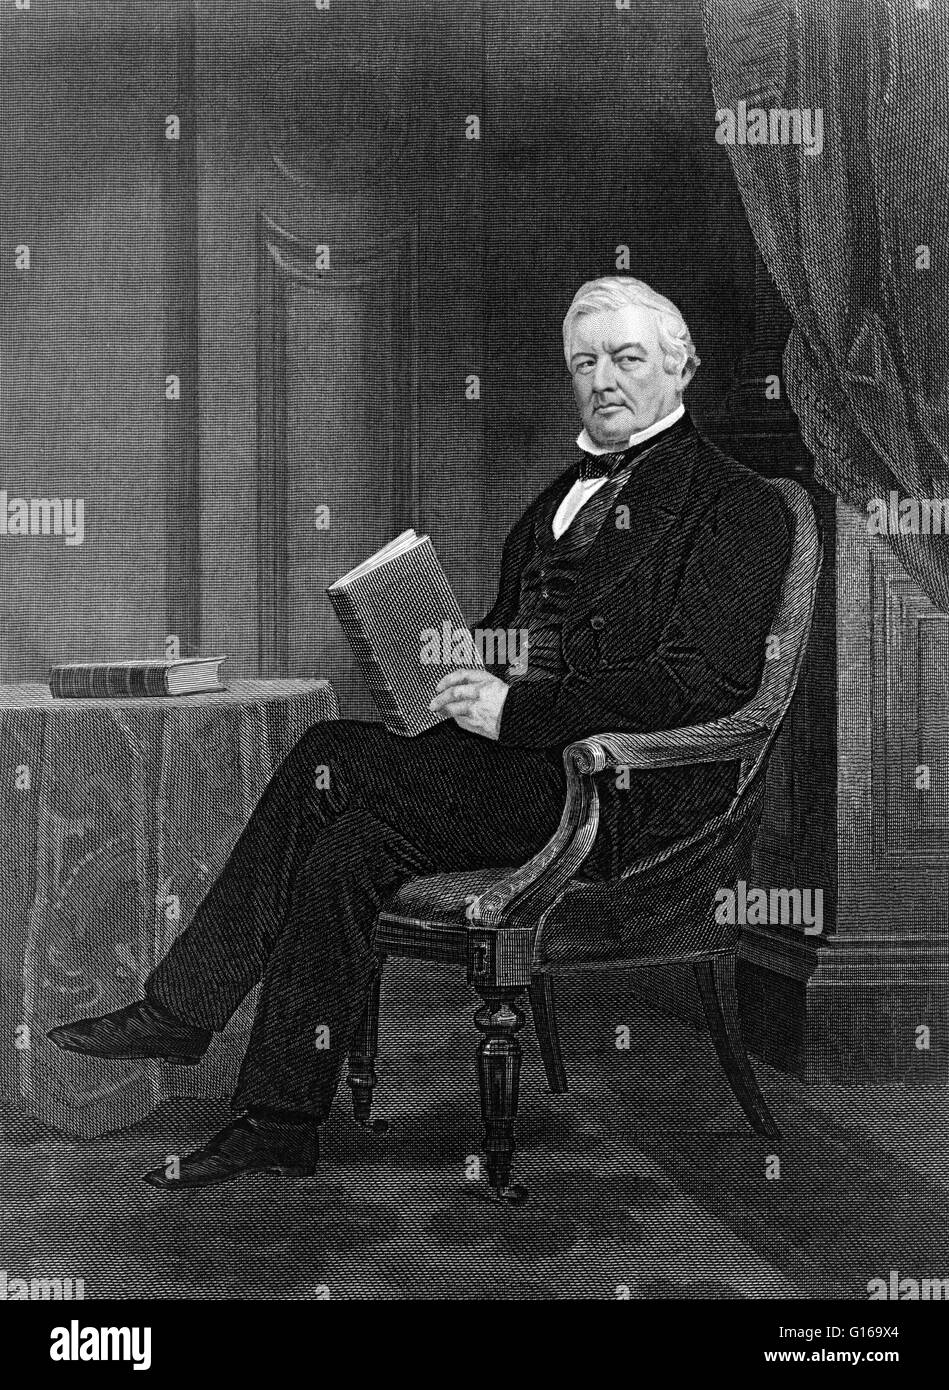 Millard Fillmore (January 7, 1800 - March 8, 1874) was the 13th President of the United States (1850-1853) and the last member of the Whig Party to hold the office of president. As Zachary Taylor's Vice President, he assumed the presidency after Taylor's Stock Photo